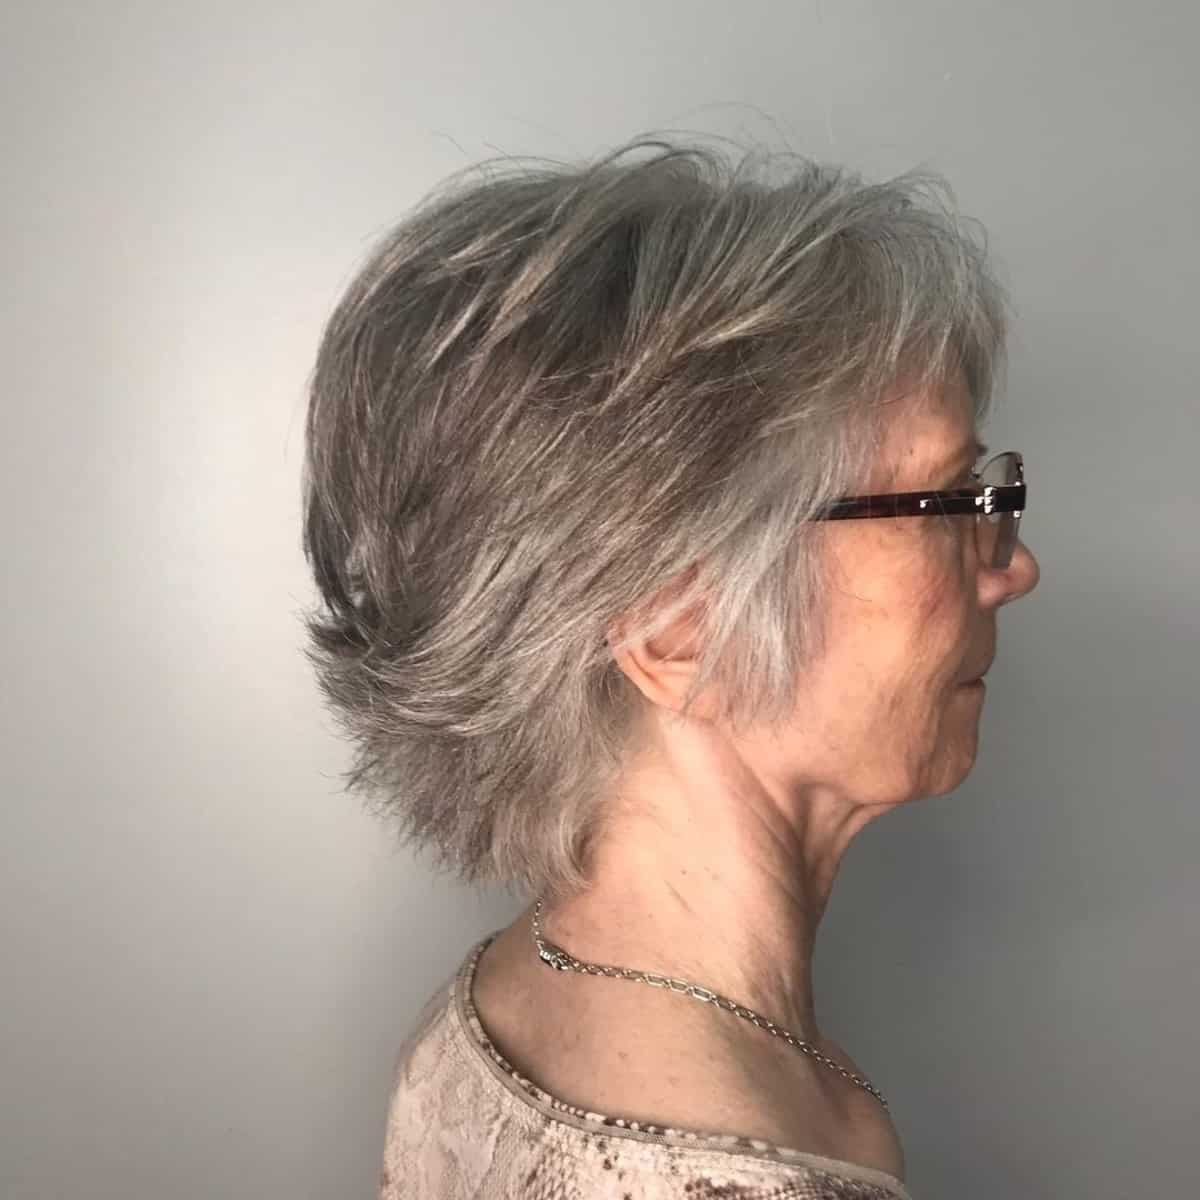 Salt and pepper shag for women over 60 with glasses